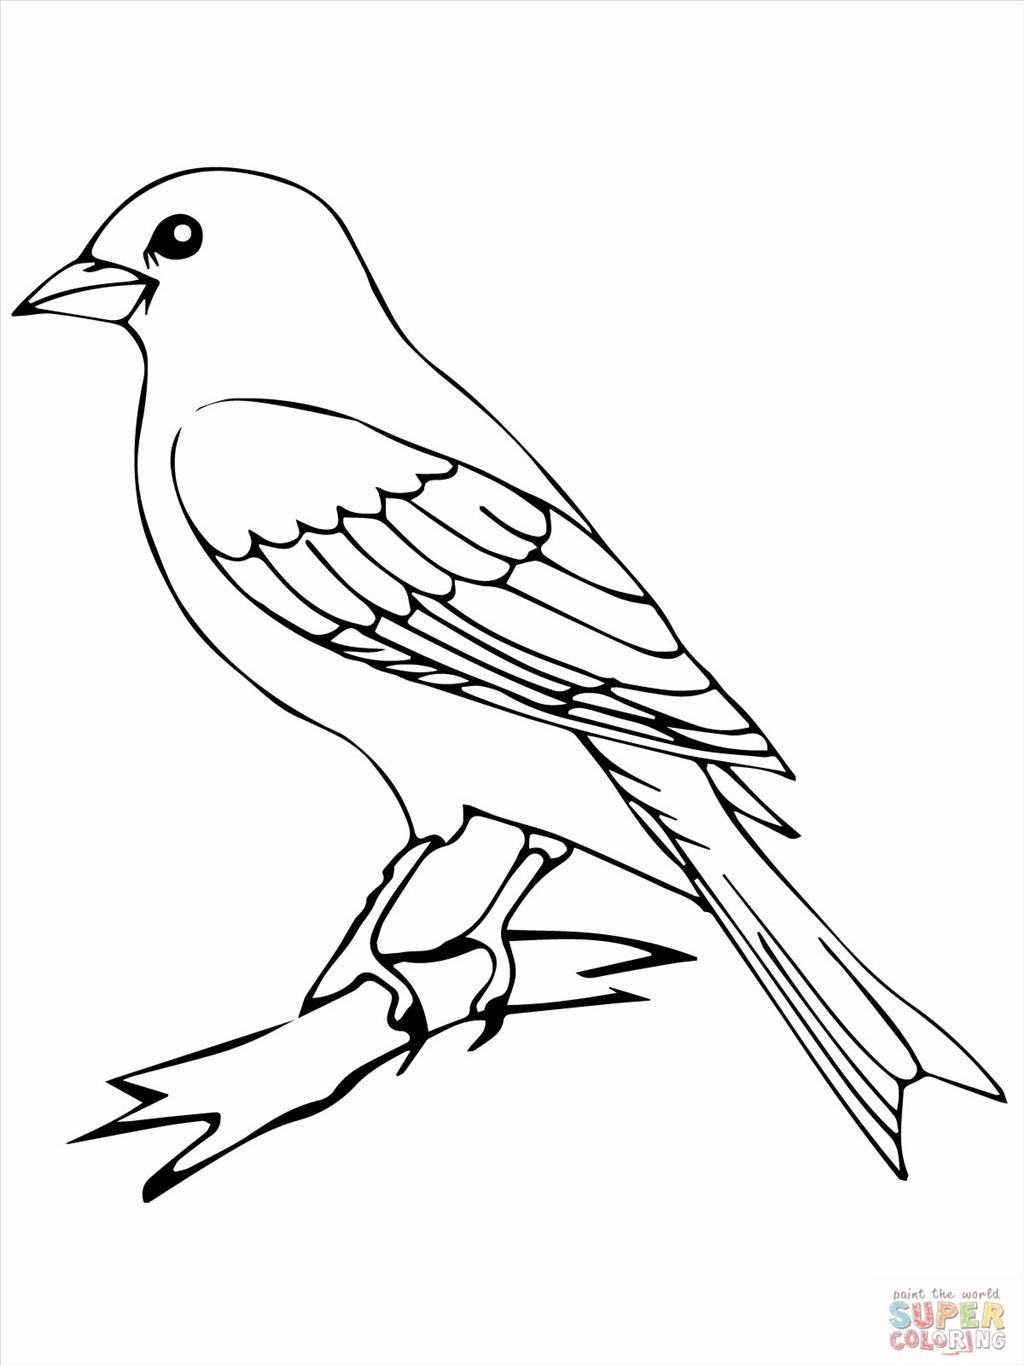 bird-outline-drawing-at-getdrawings-free-download